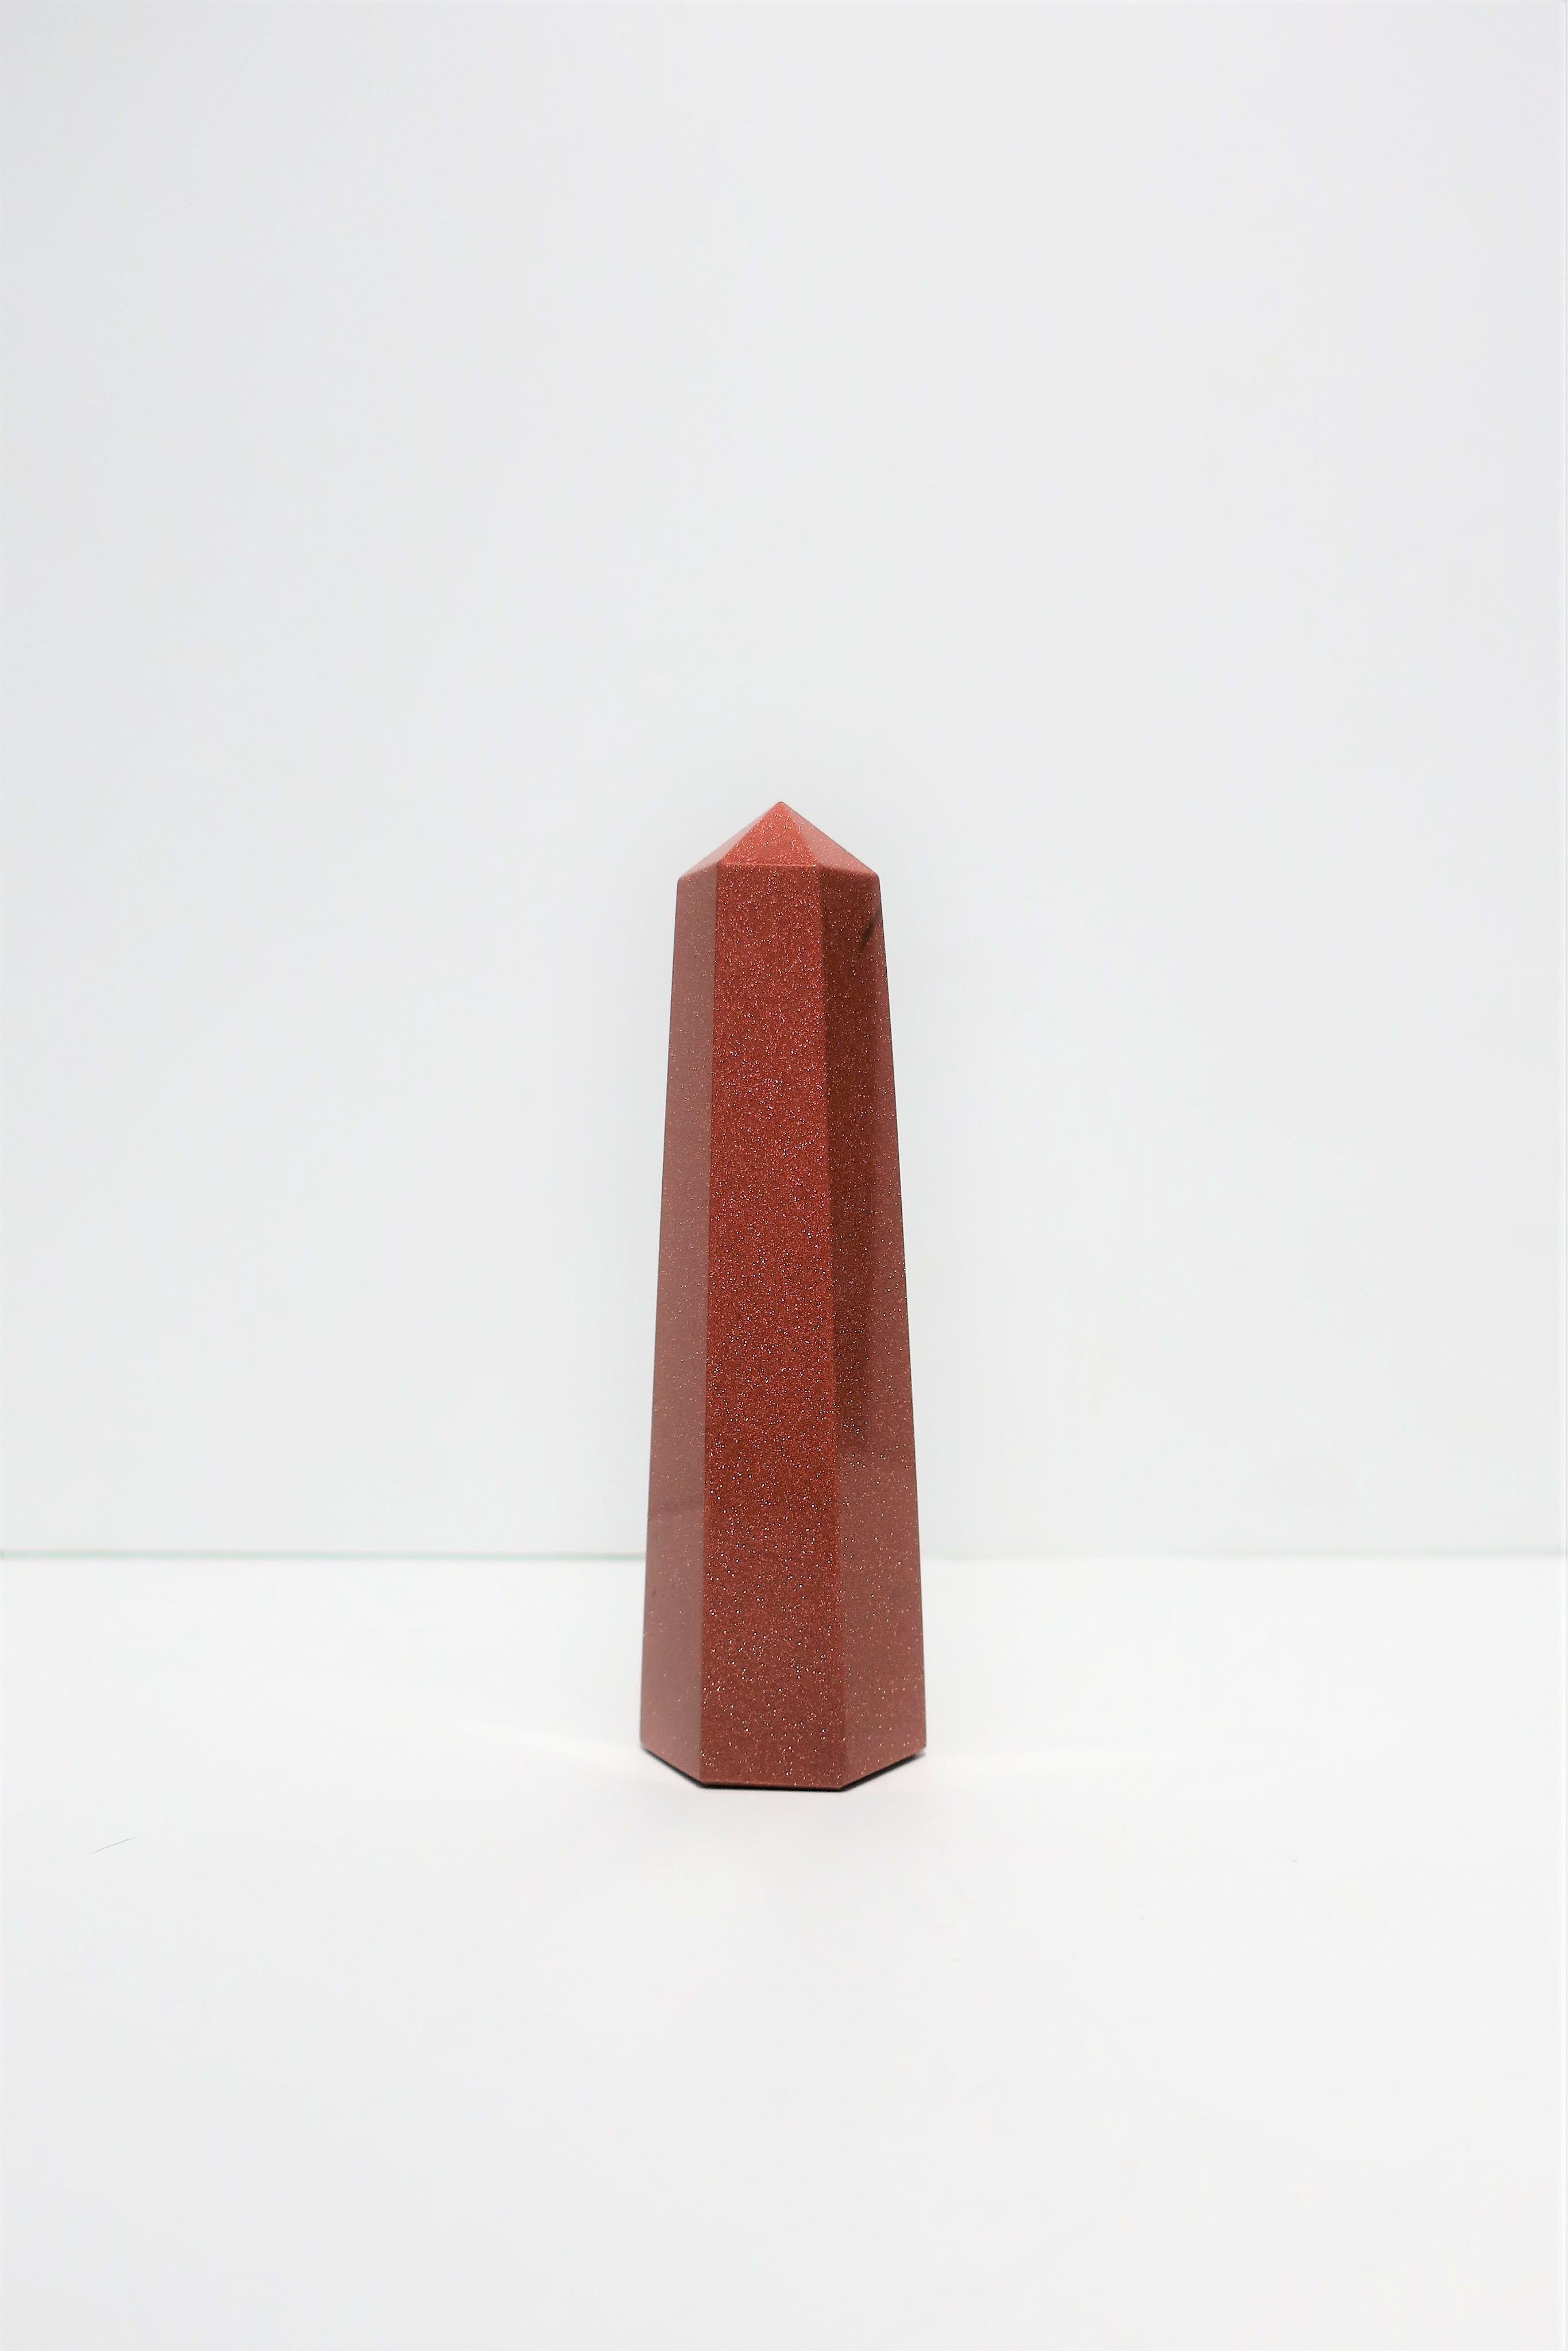 An Italian modern style goldstone art glass Obelisk in a hexagon design, circa late 20th century, Italy. This goldstone piece is a shimmering metallic copper or terracotta colored art glass, cut and polished smooth. 

Measures: 1.5